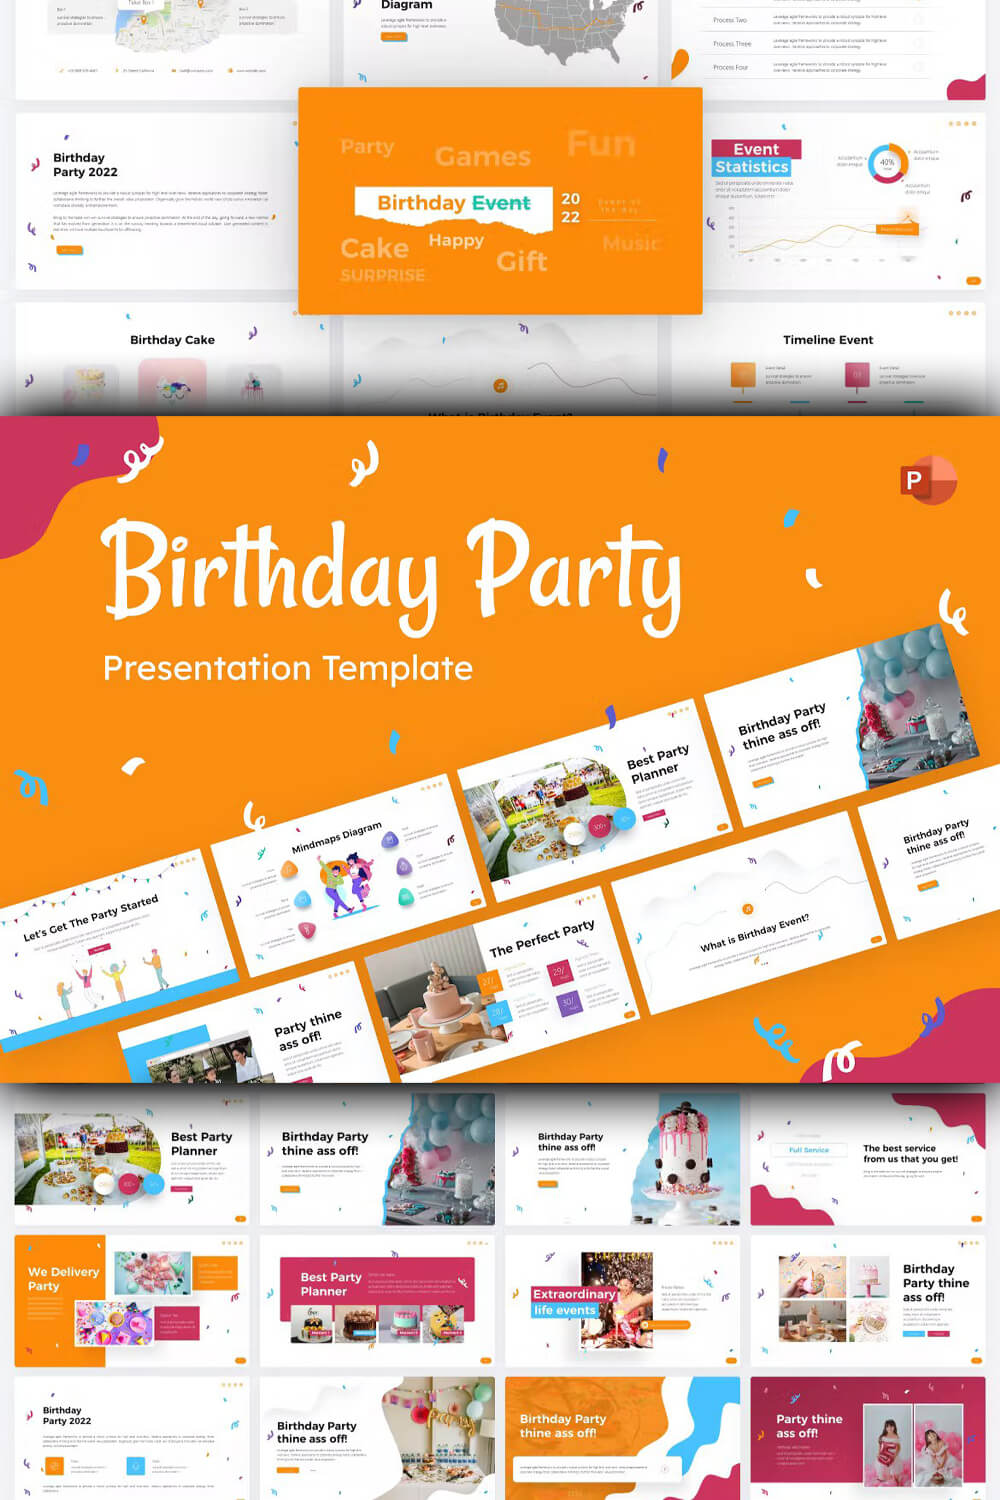 Let's get the party started with Birthday Party Creative PowerPoint Template.